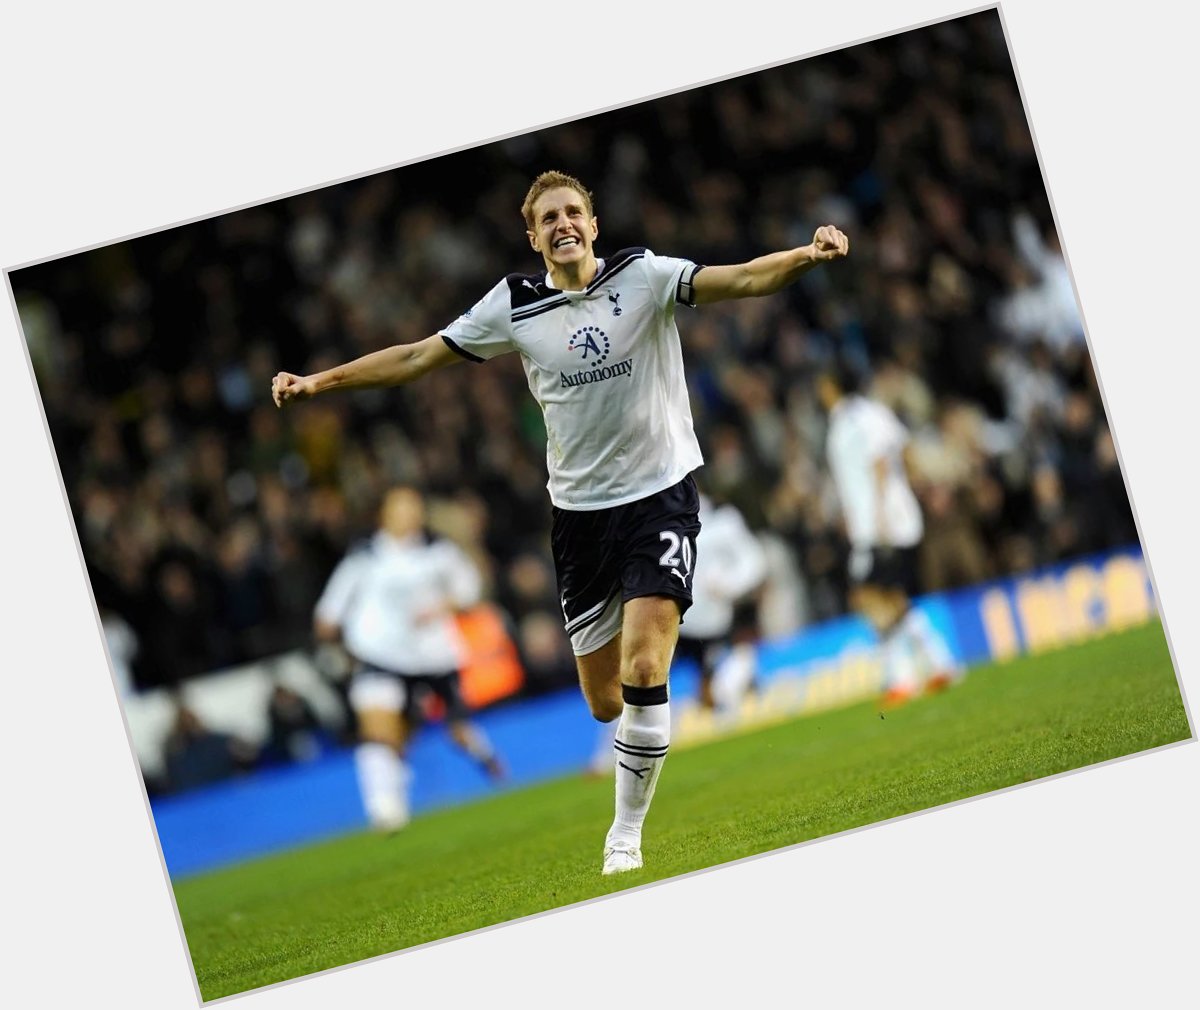 Happy Birthday 2 Michael Dawson
Forever 1 of me own Spurs Legends 